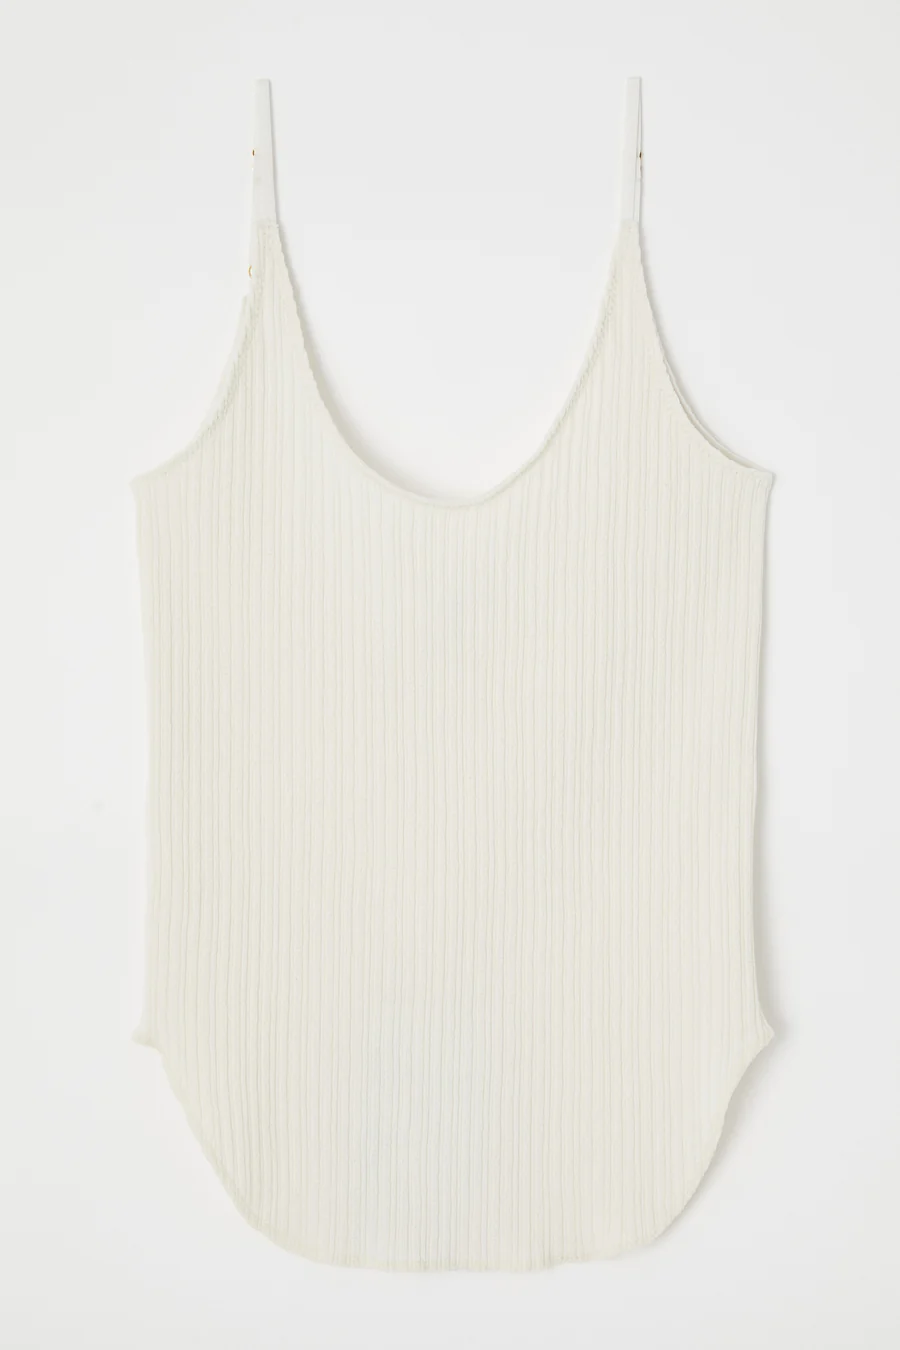 Moussy - Comfort Basic Camisole in Off White